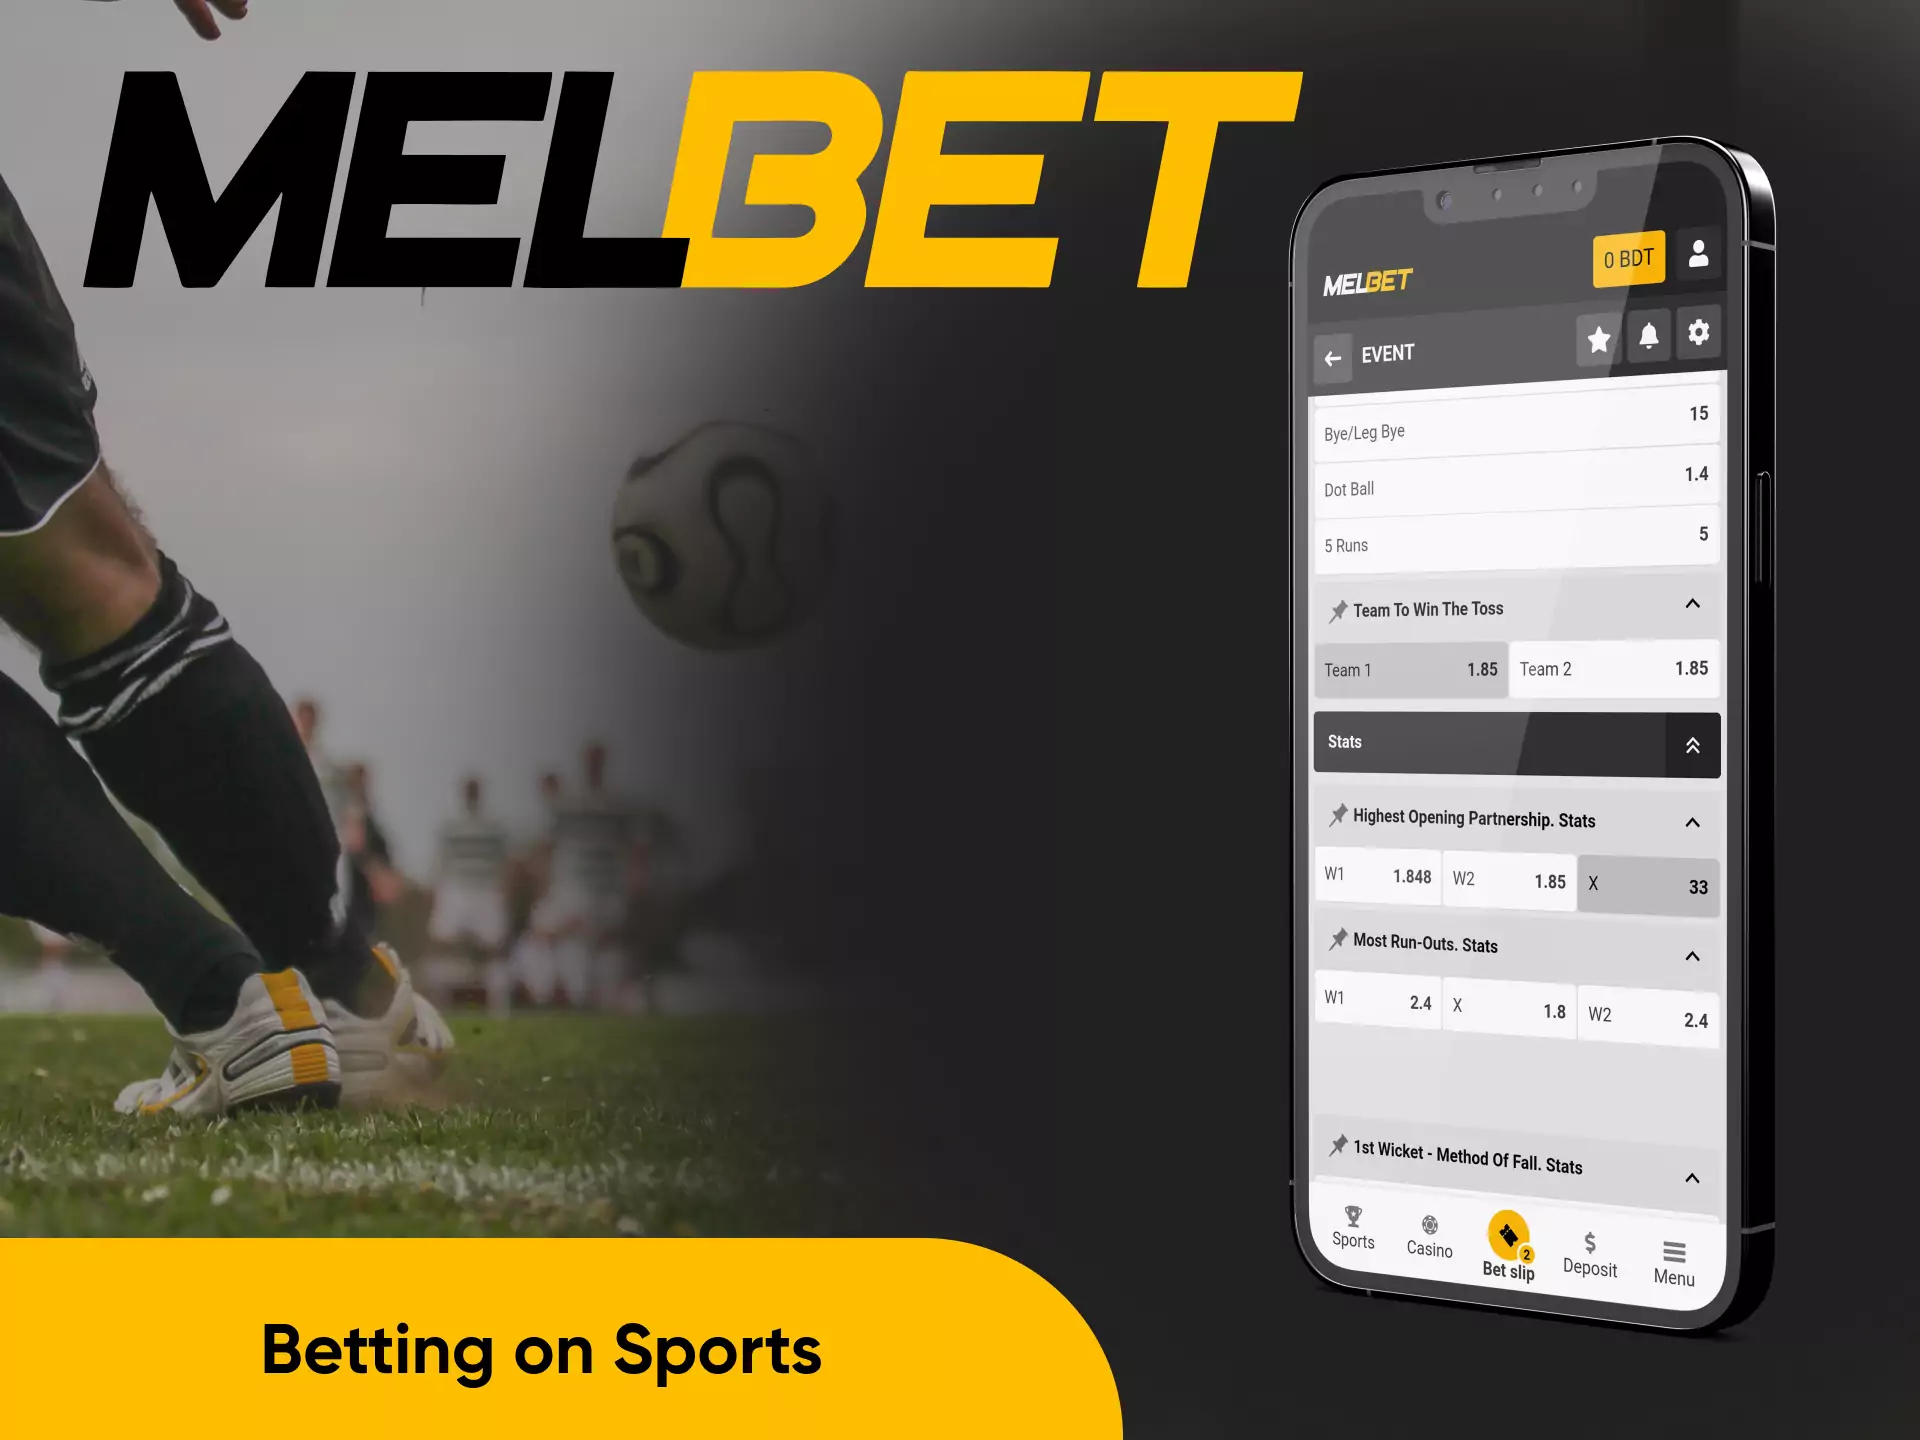 Betting on sports matches is the main activity of the Melbet app.